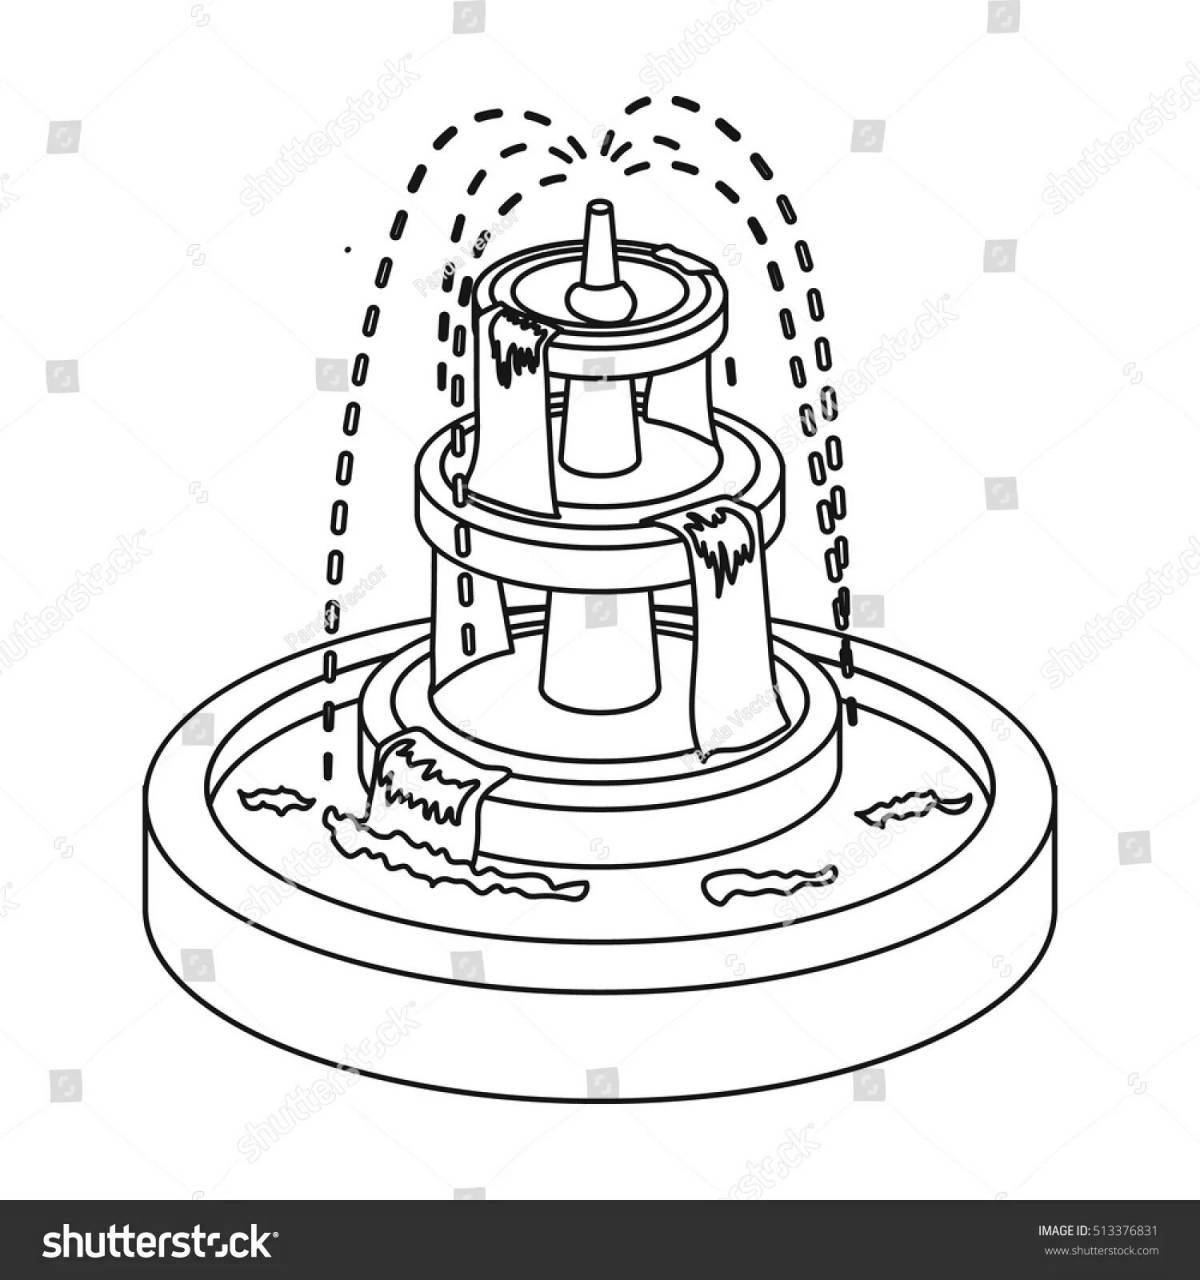 Merry fountain coloring pages for kids